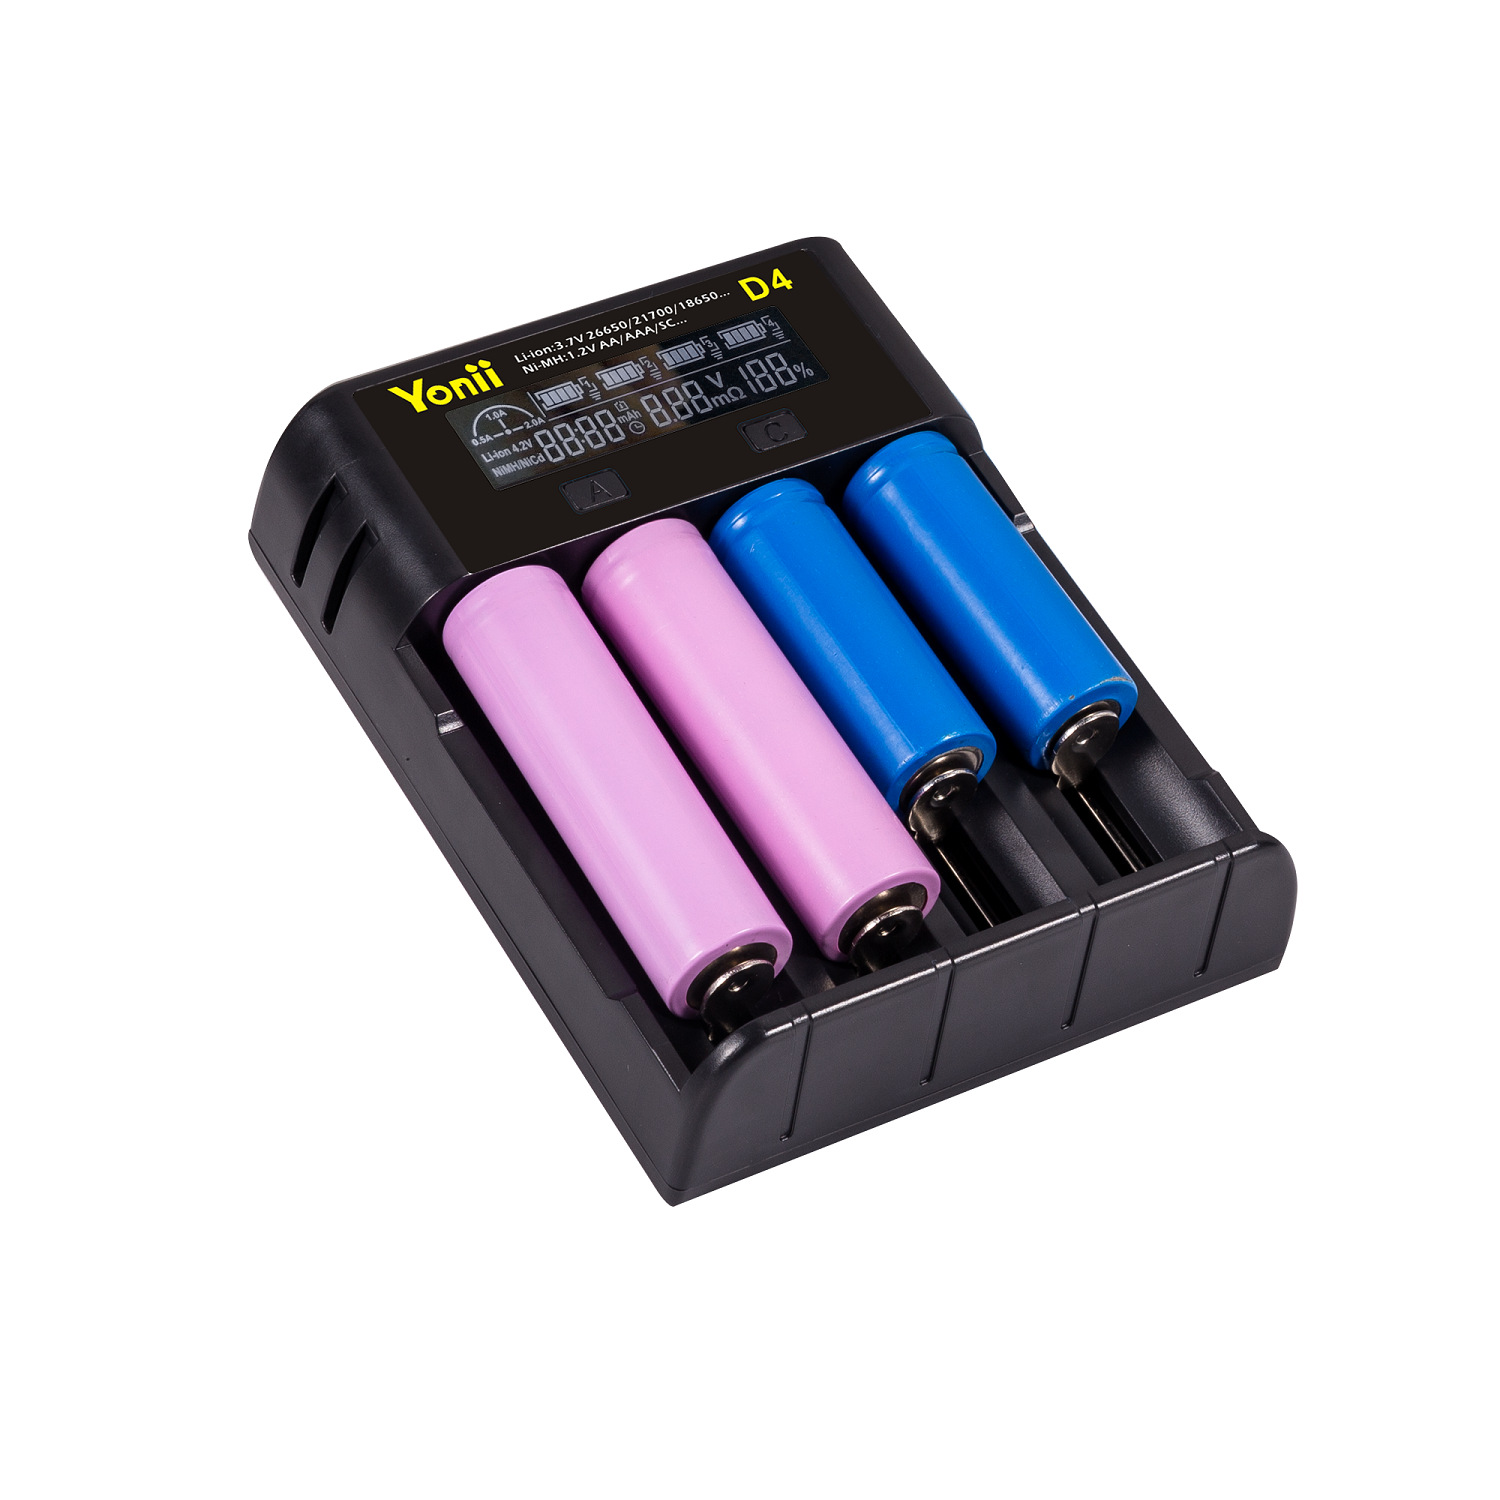 Yonii D4 Four Slot USB Rechargeable Lithium Battery Charger Multi-functional Intelligent Charger for 18650/26650/21700/AAA Battery